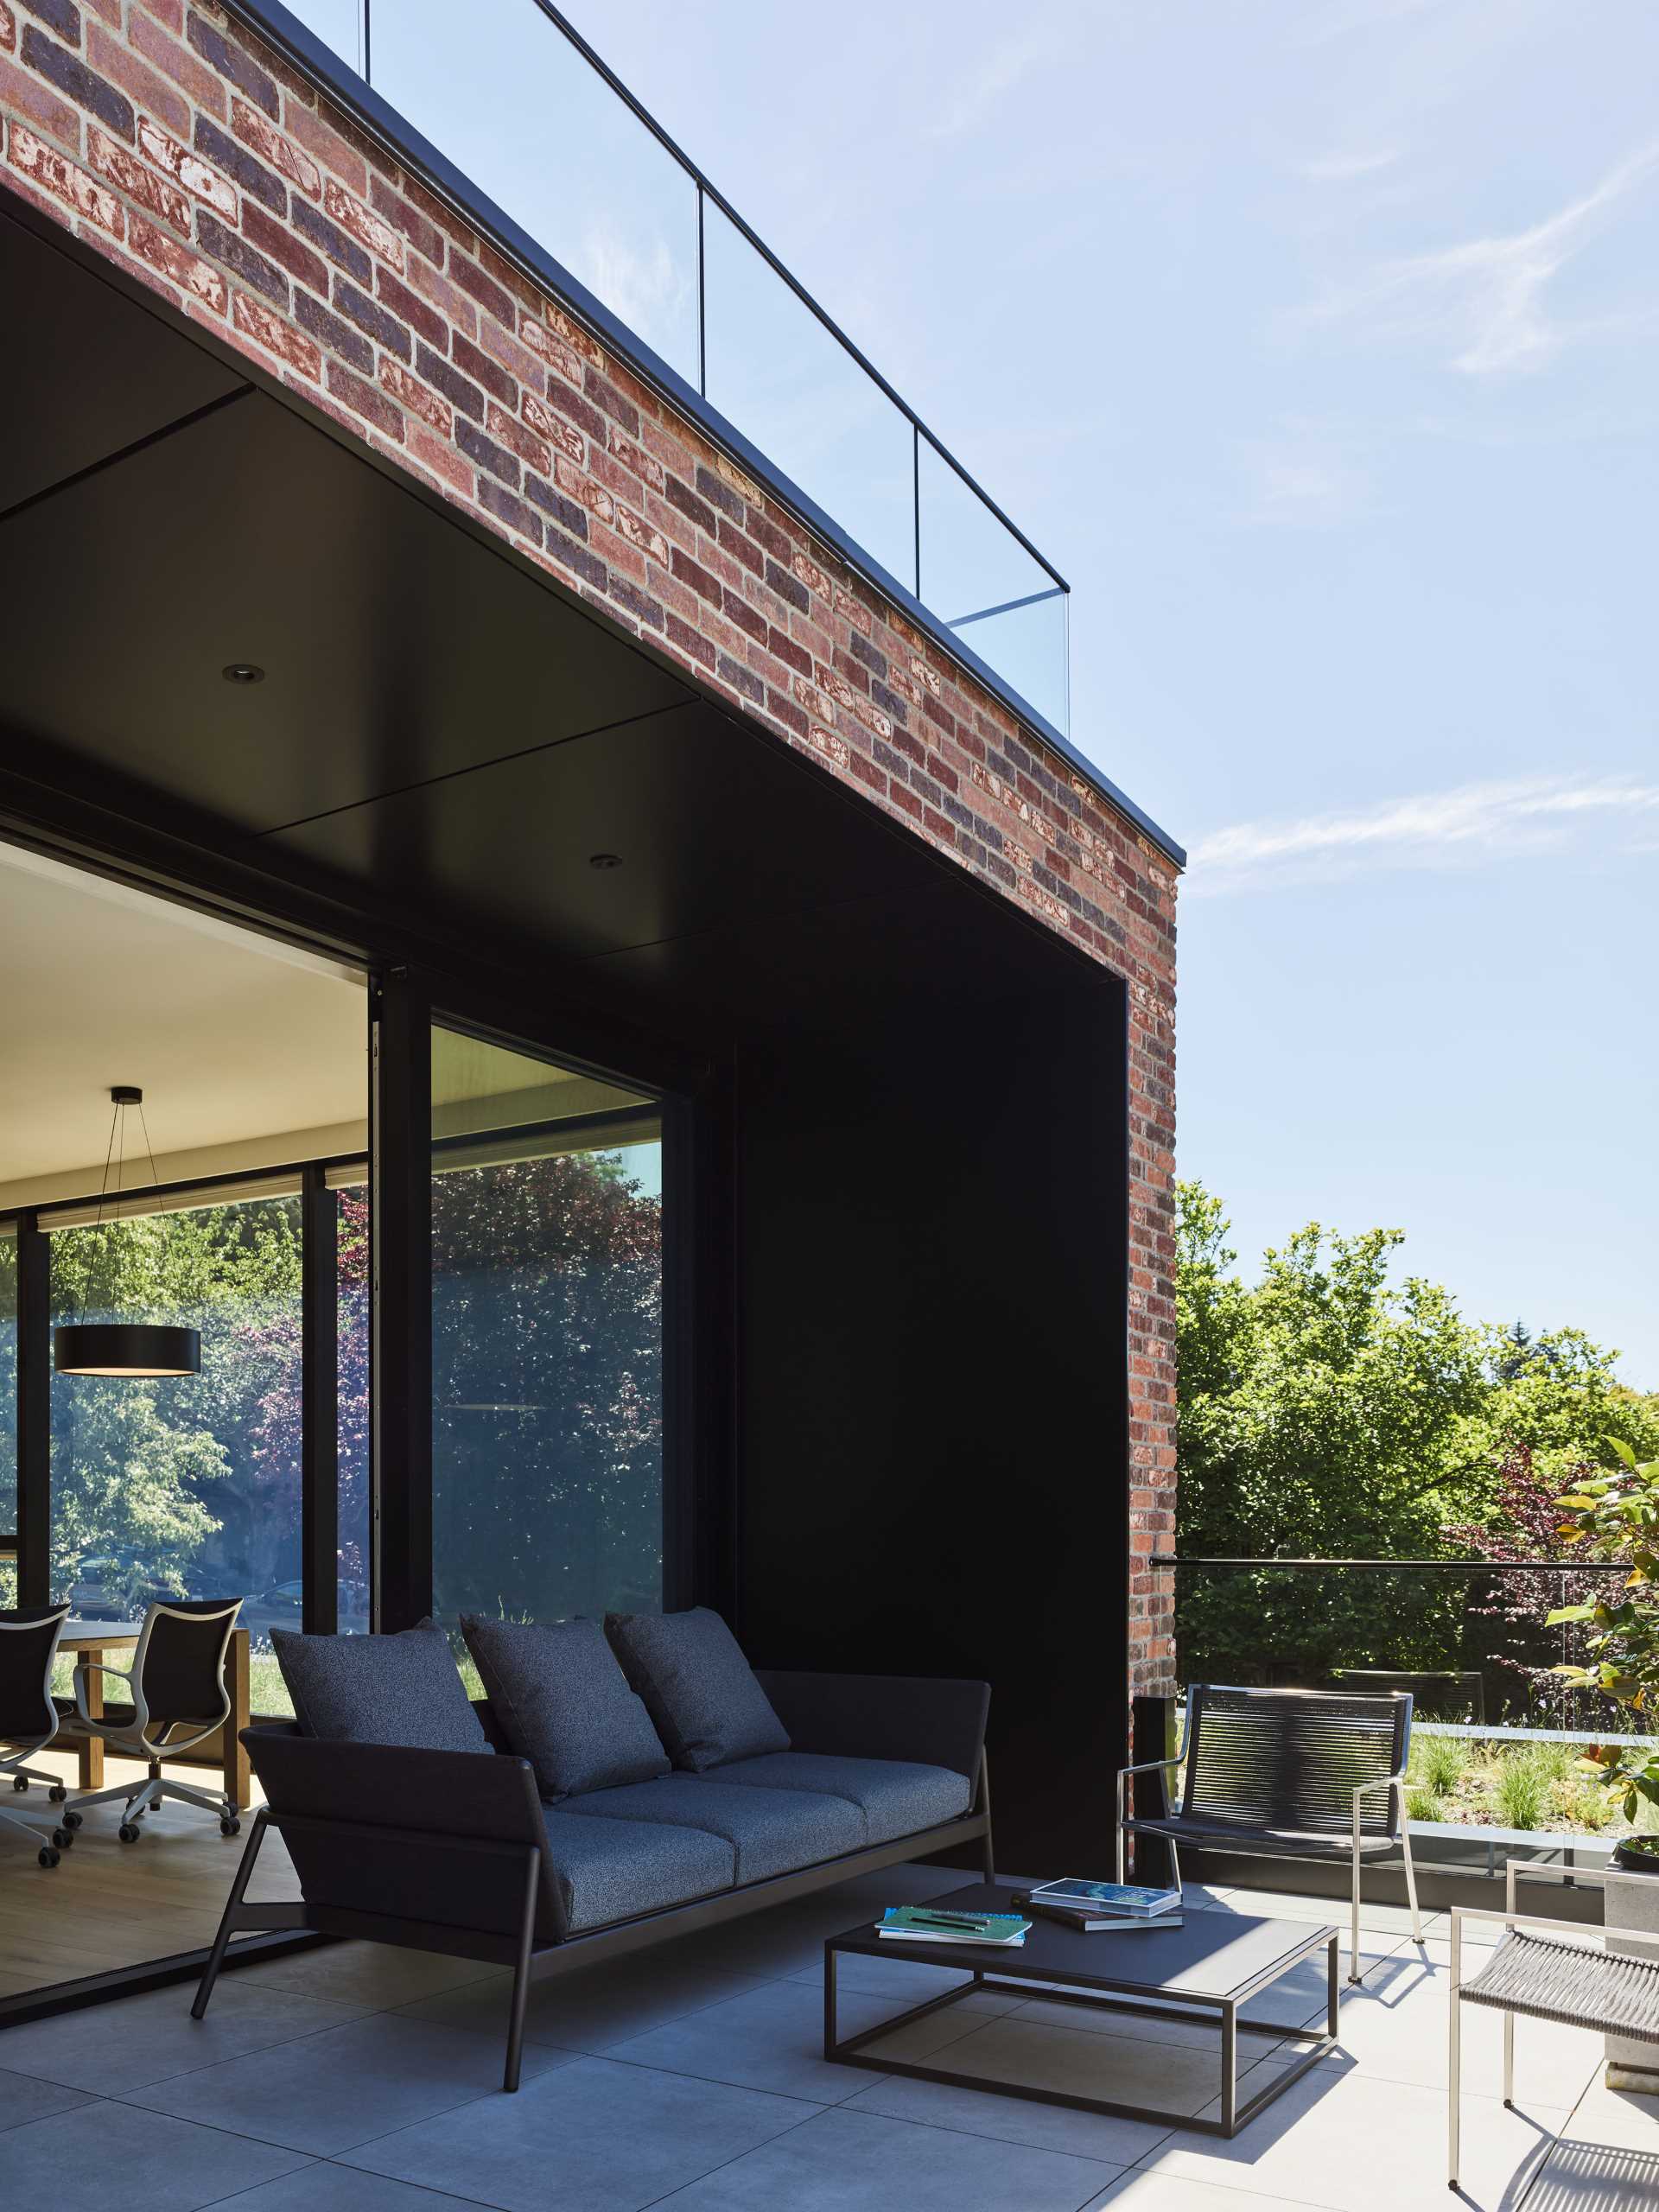 A modern brick house with black window frames and patio.